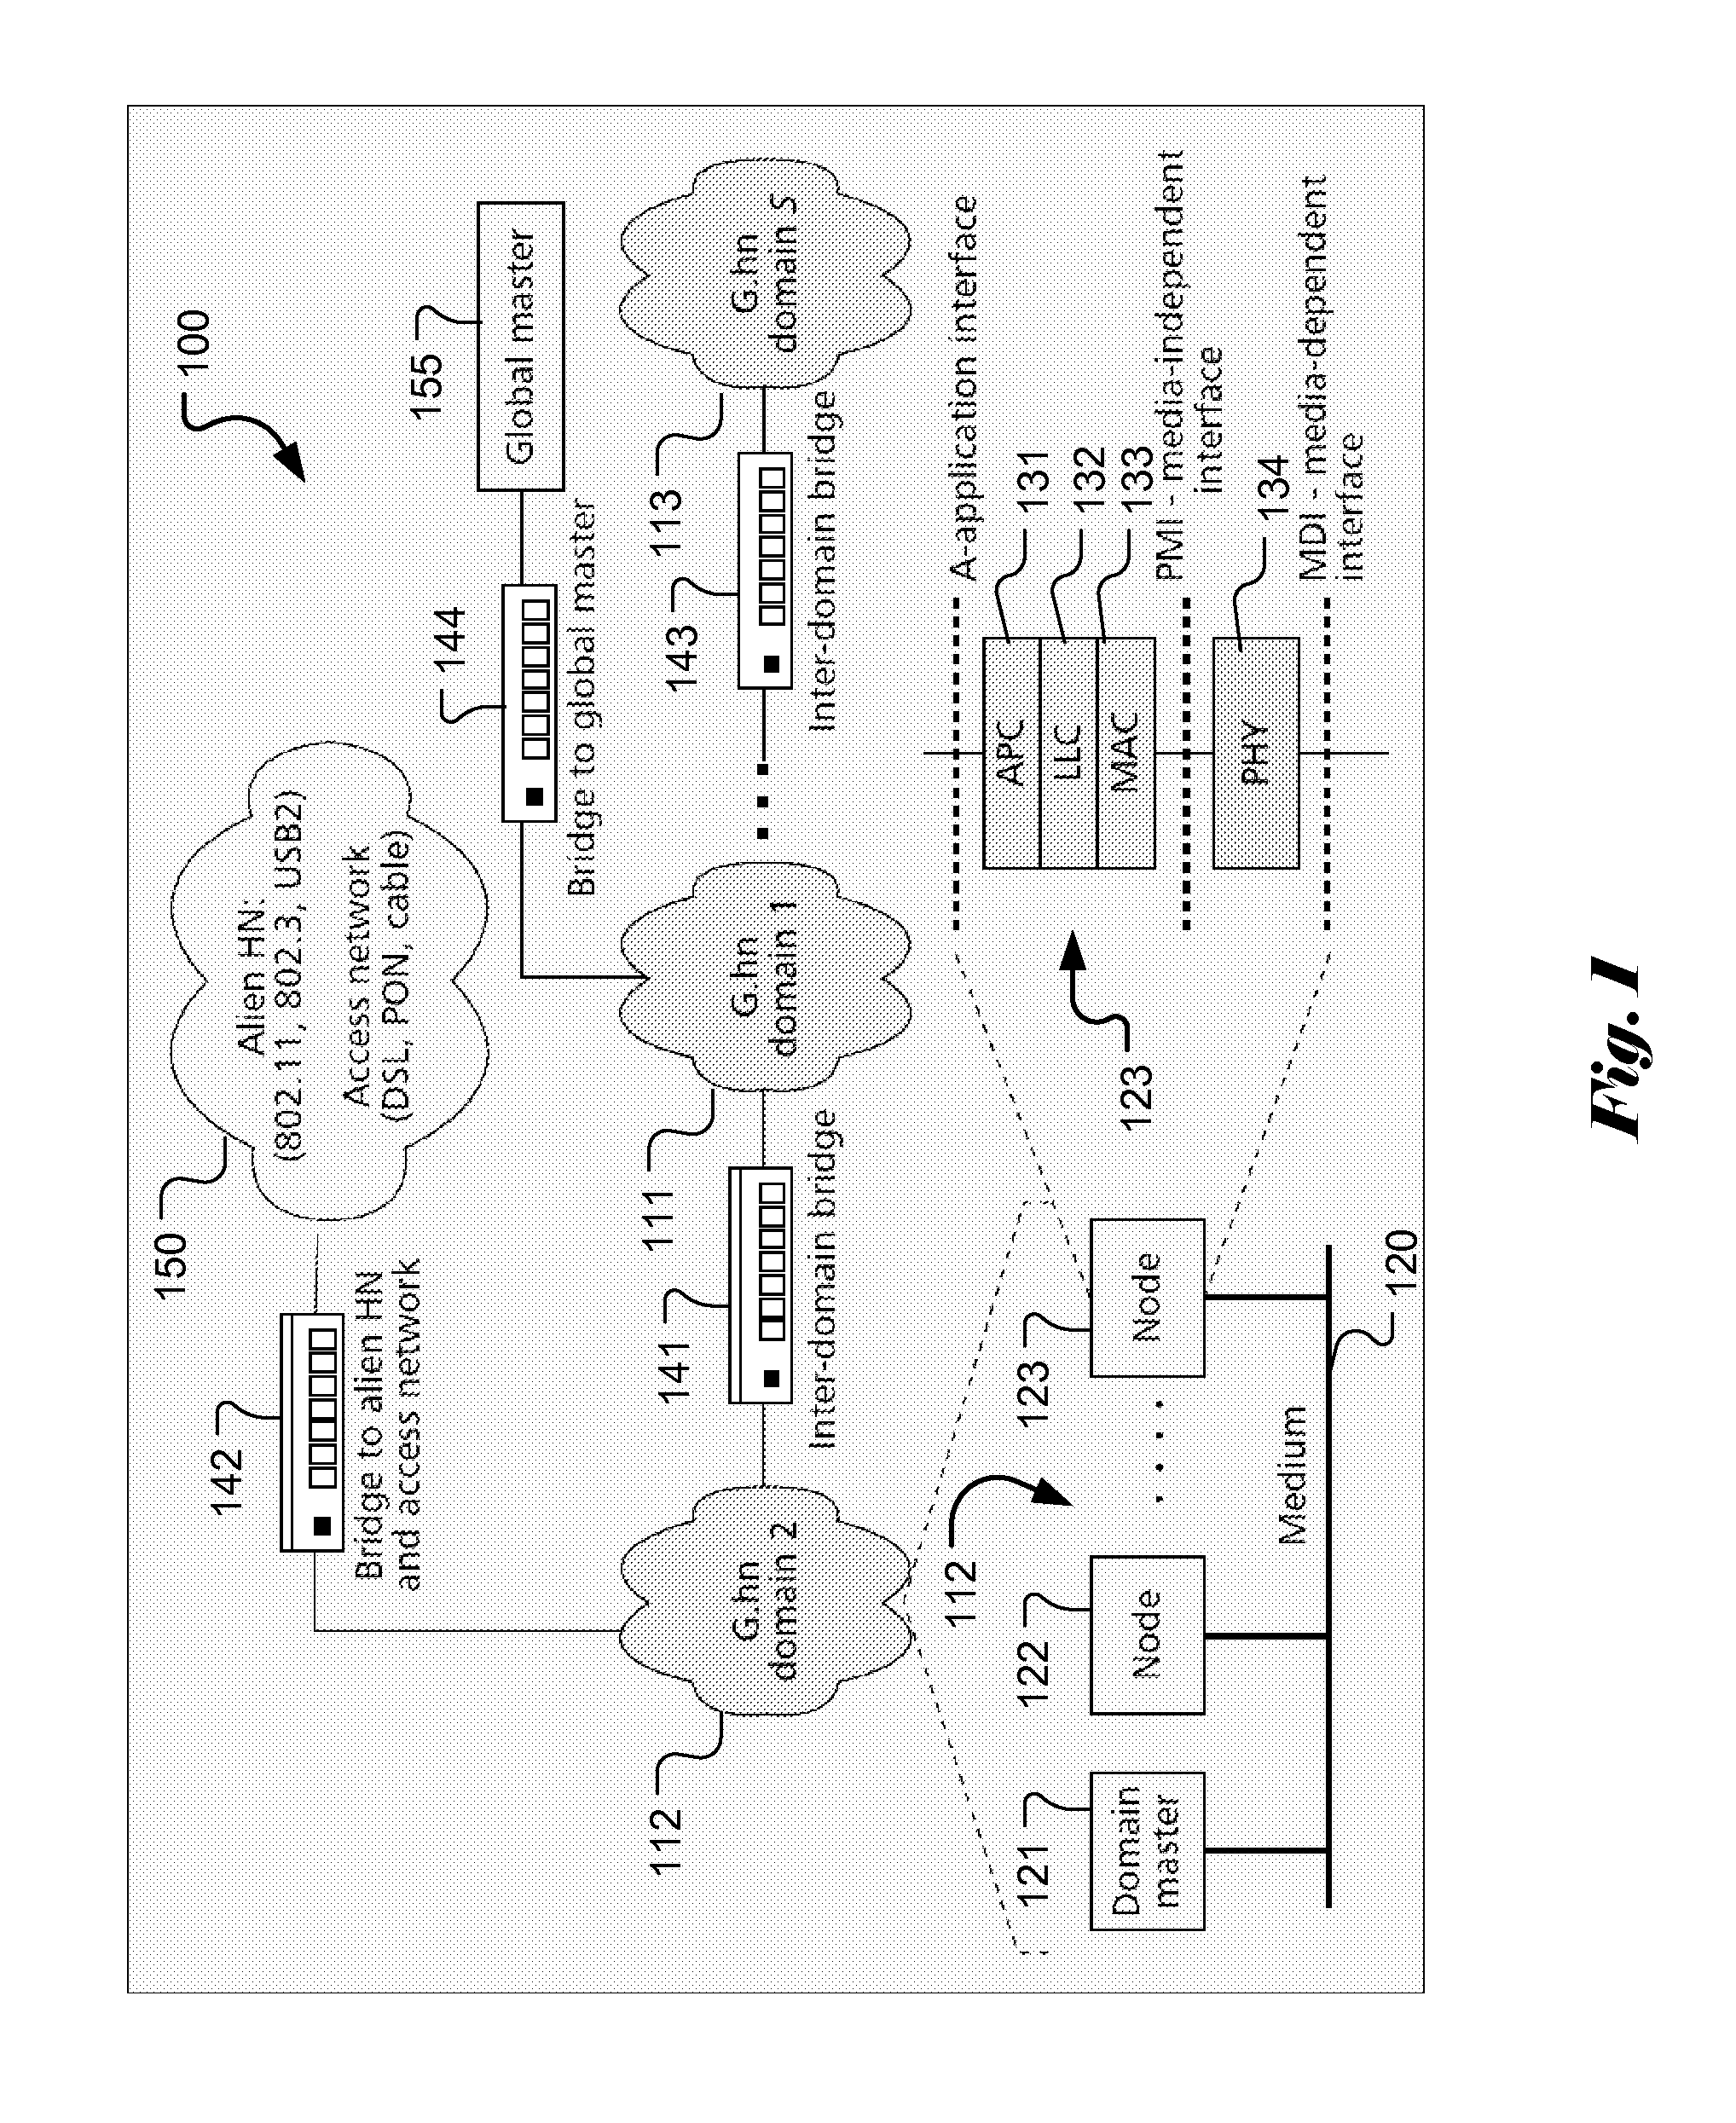 Method and Apparatus for Quick-Switch Fault Tolerant Backup Channel